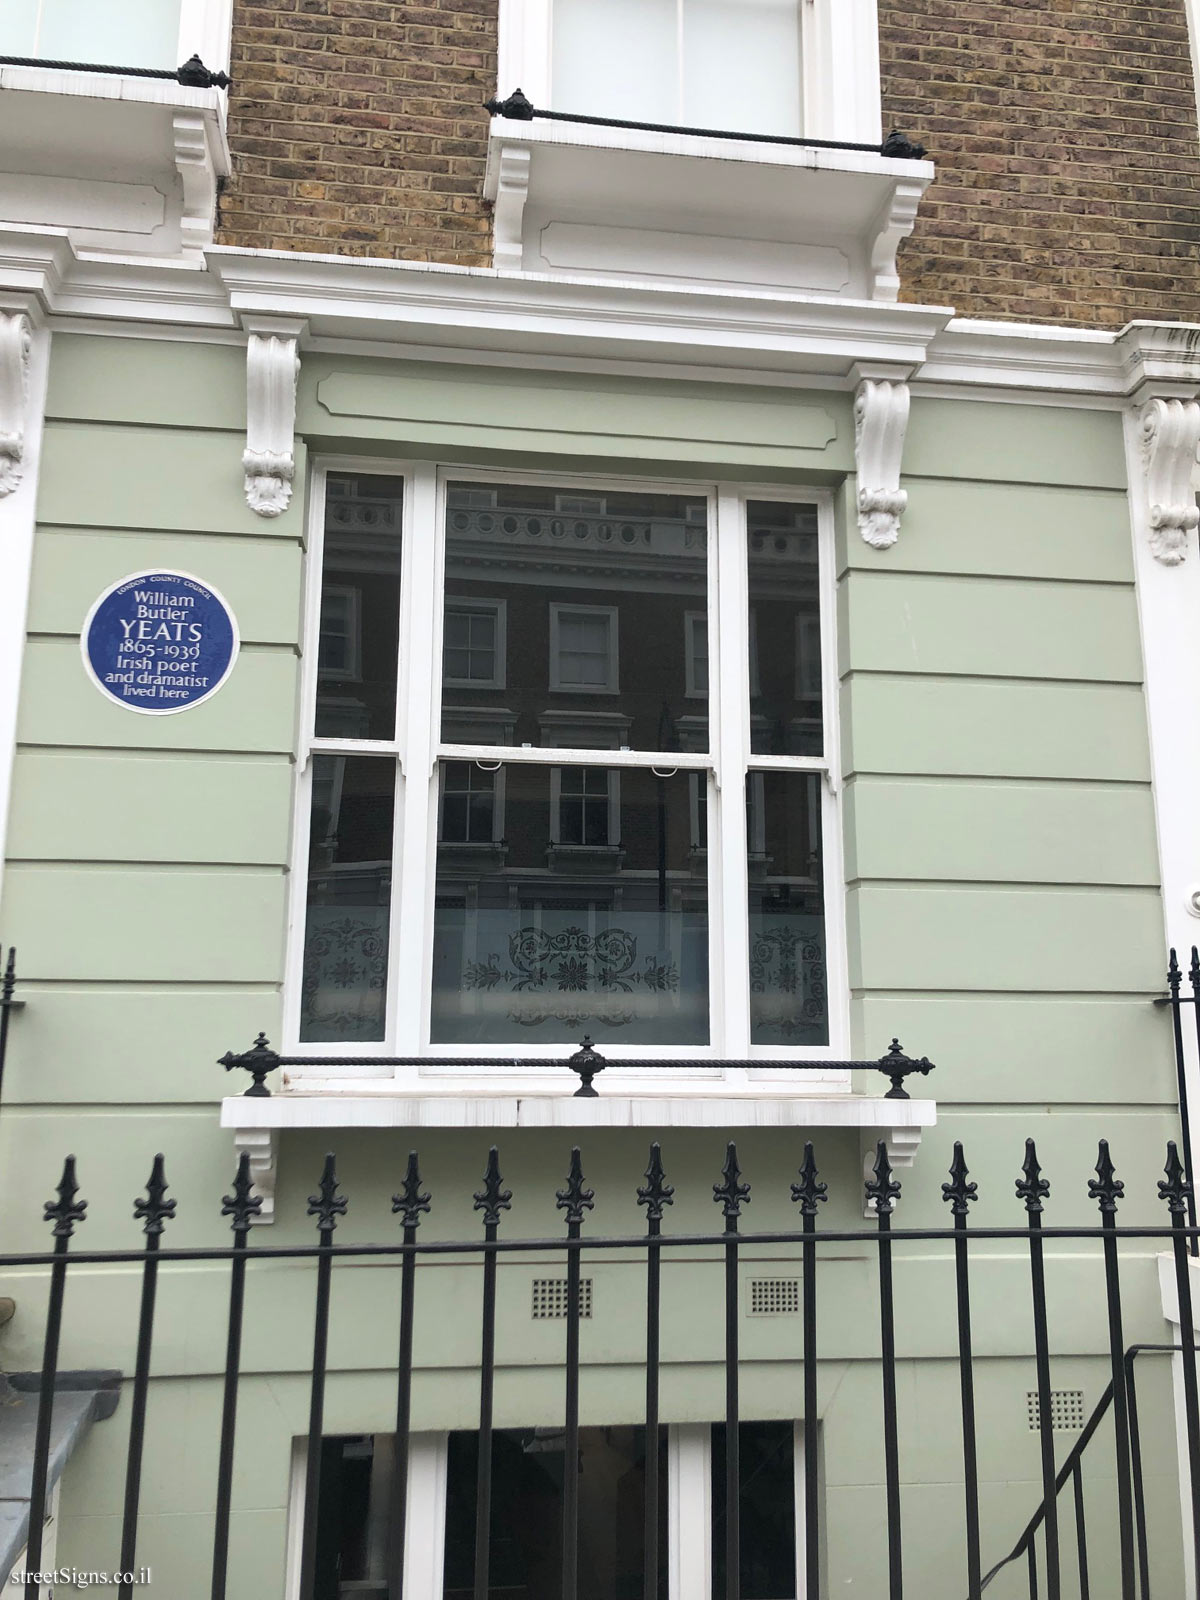 London - Memorial plaque at the residence of William Butler Yeats - 23 Fitzroy Rd, Camden Town, London NW1 8TP, UK